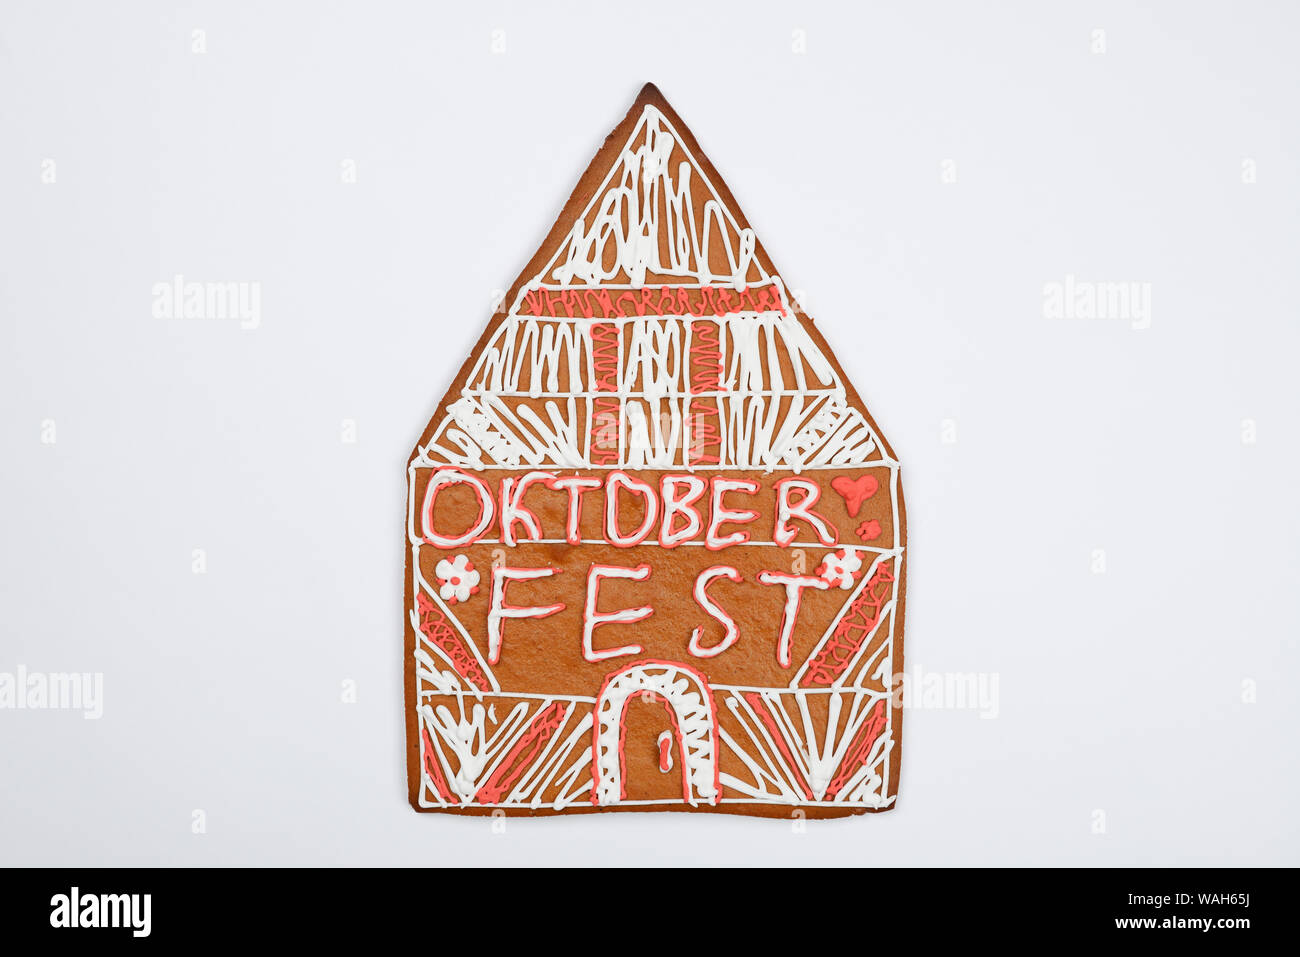 The gingerbread house with Oktoberfest inscription on white background Stock Photo